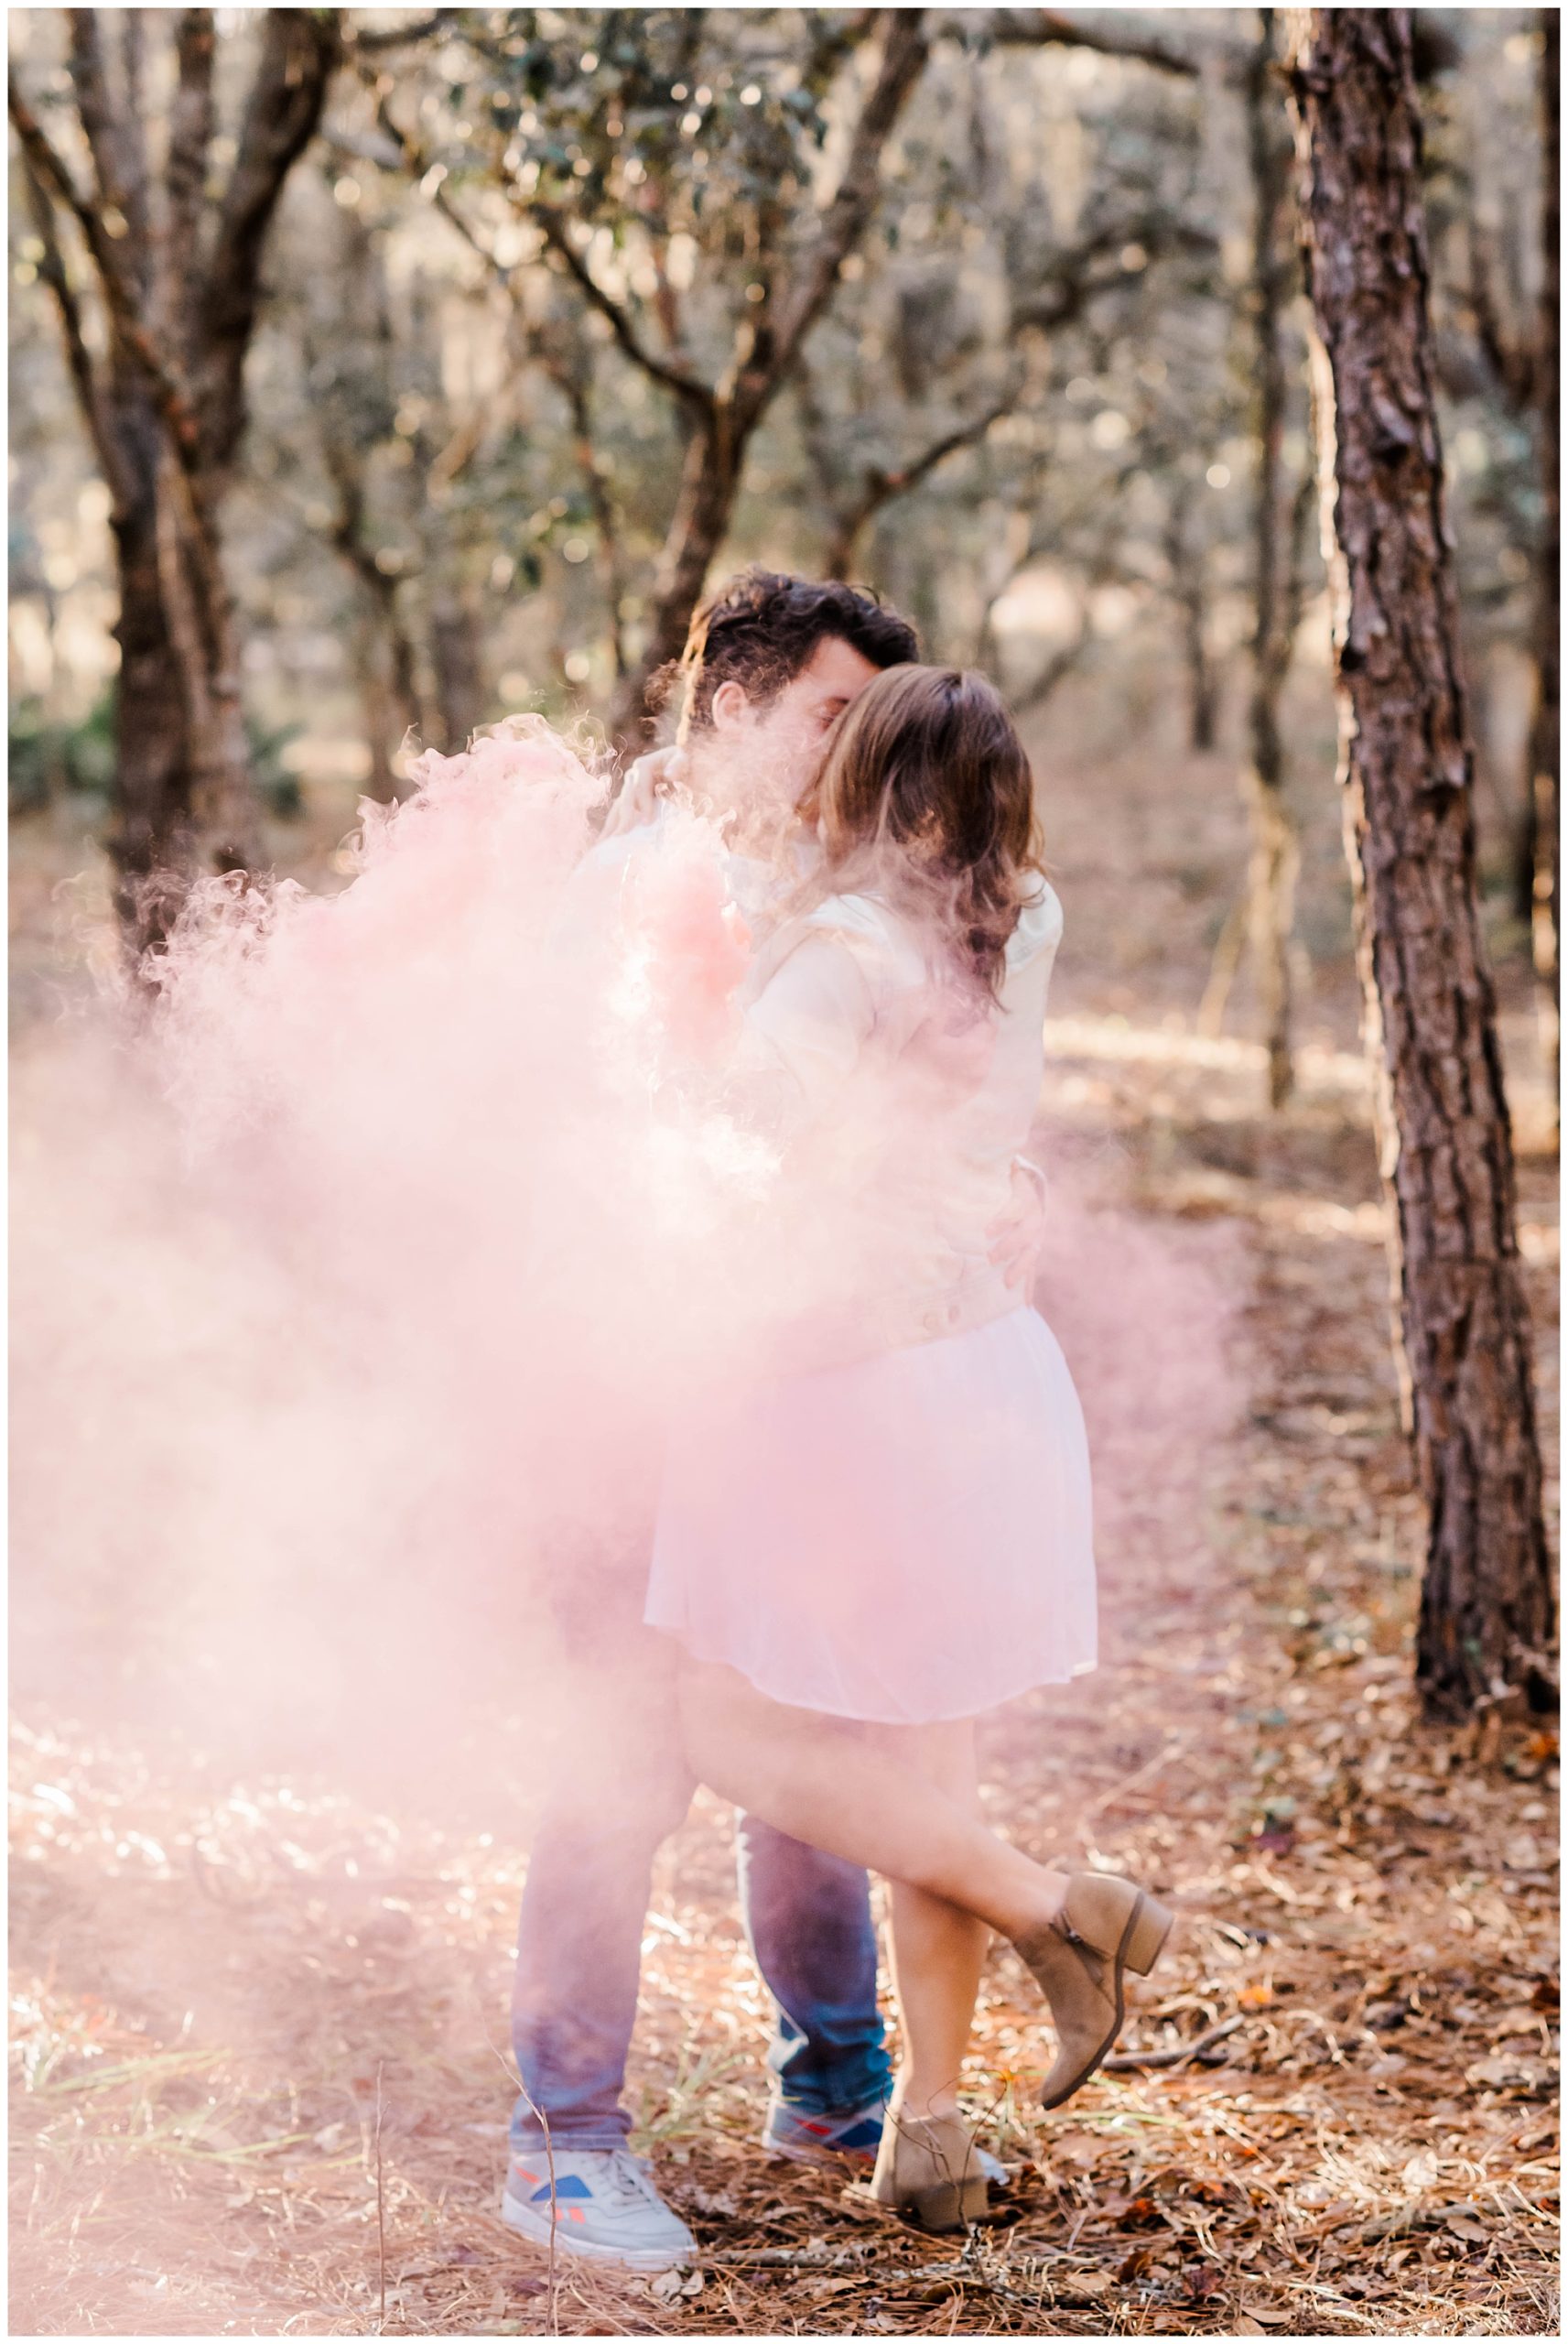 Lake Louisa State Park Gender Reveal Session | Haleigh Nicole Photography | This gender reveal session at Lake Louisa State Park in Clermont, Florida featured pink gender reveal smoke bombs for the couple's baby girl. #genderreveal #smokebombs #genderrevealsmokebombs #lakelouisa #orlandoportraitphotographer #orlandomaternityphotographer #orlandoflorida